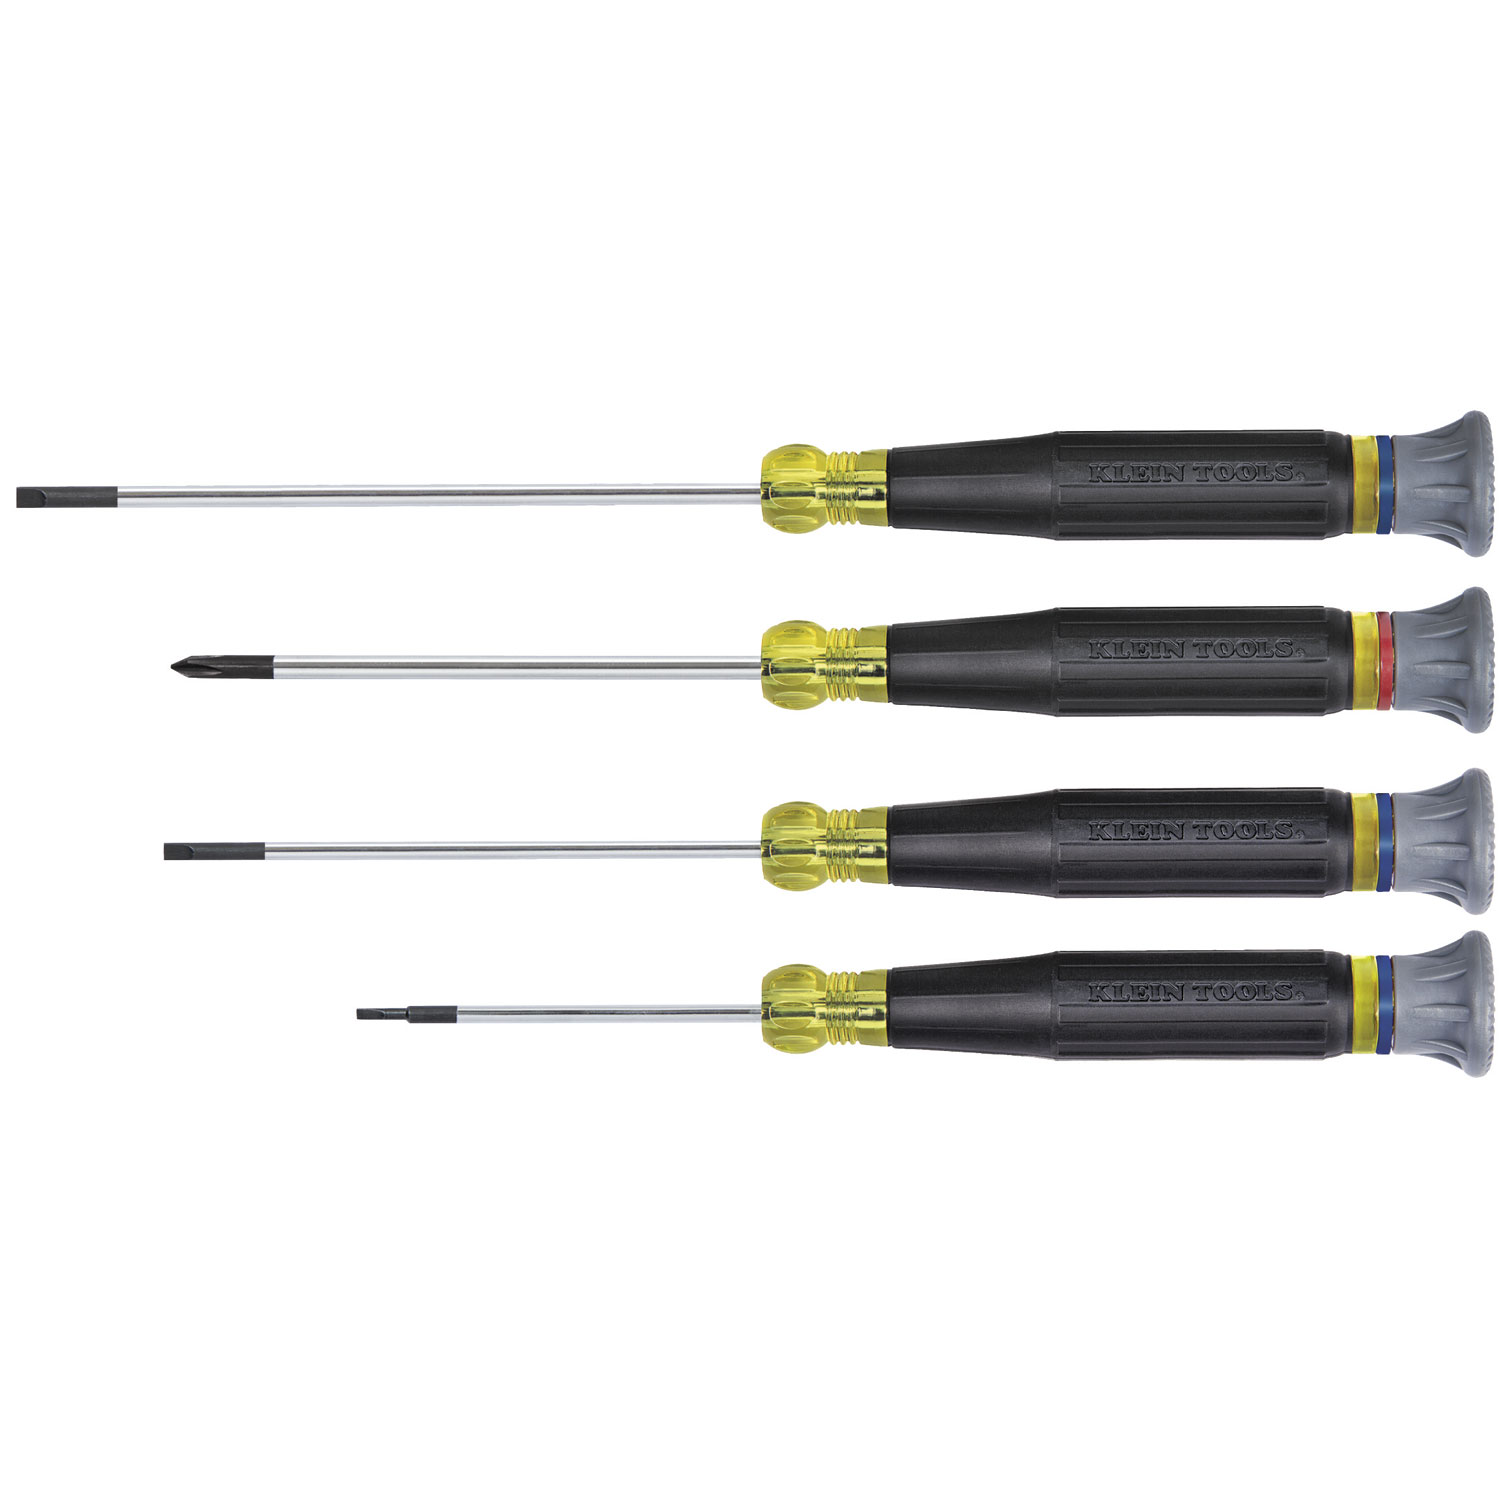 Greenlee 9953-13 6 in 1 Screwdriver Replacement Bits for sale online 